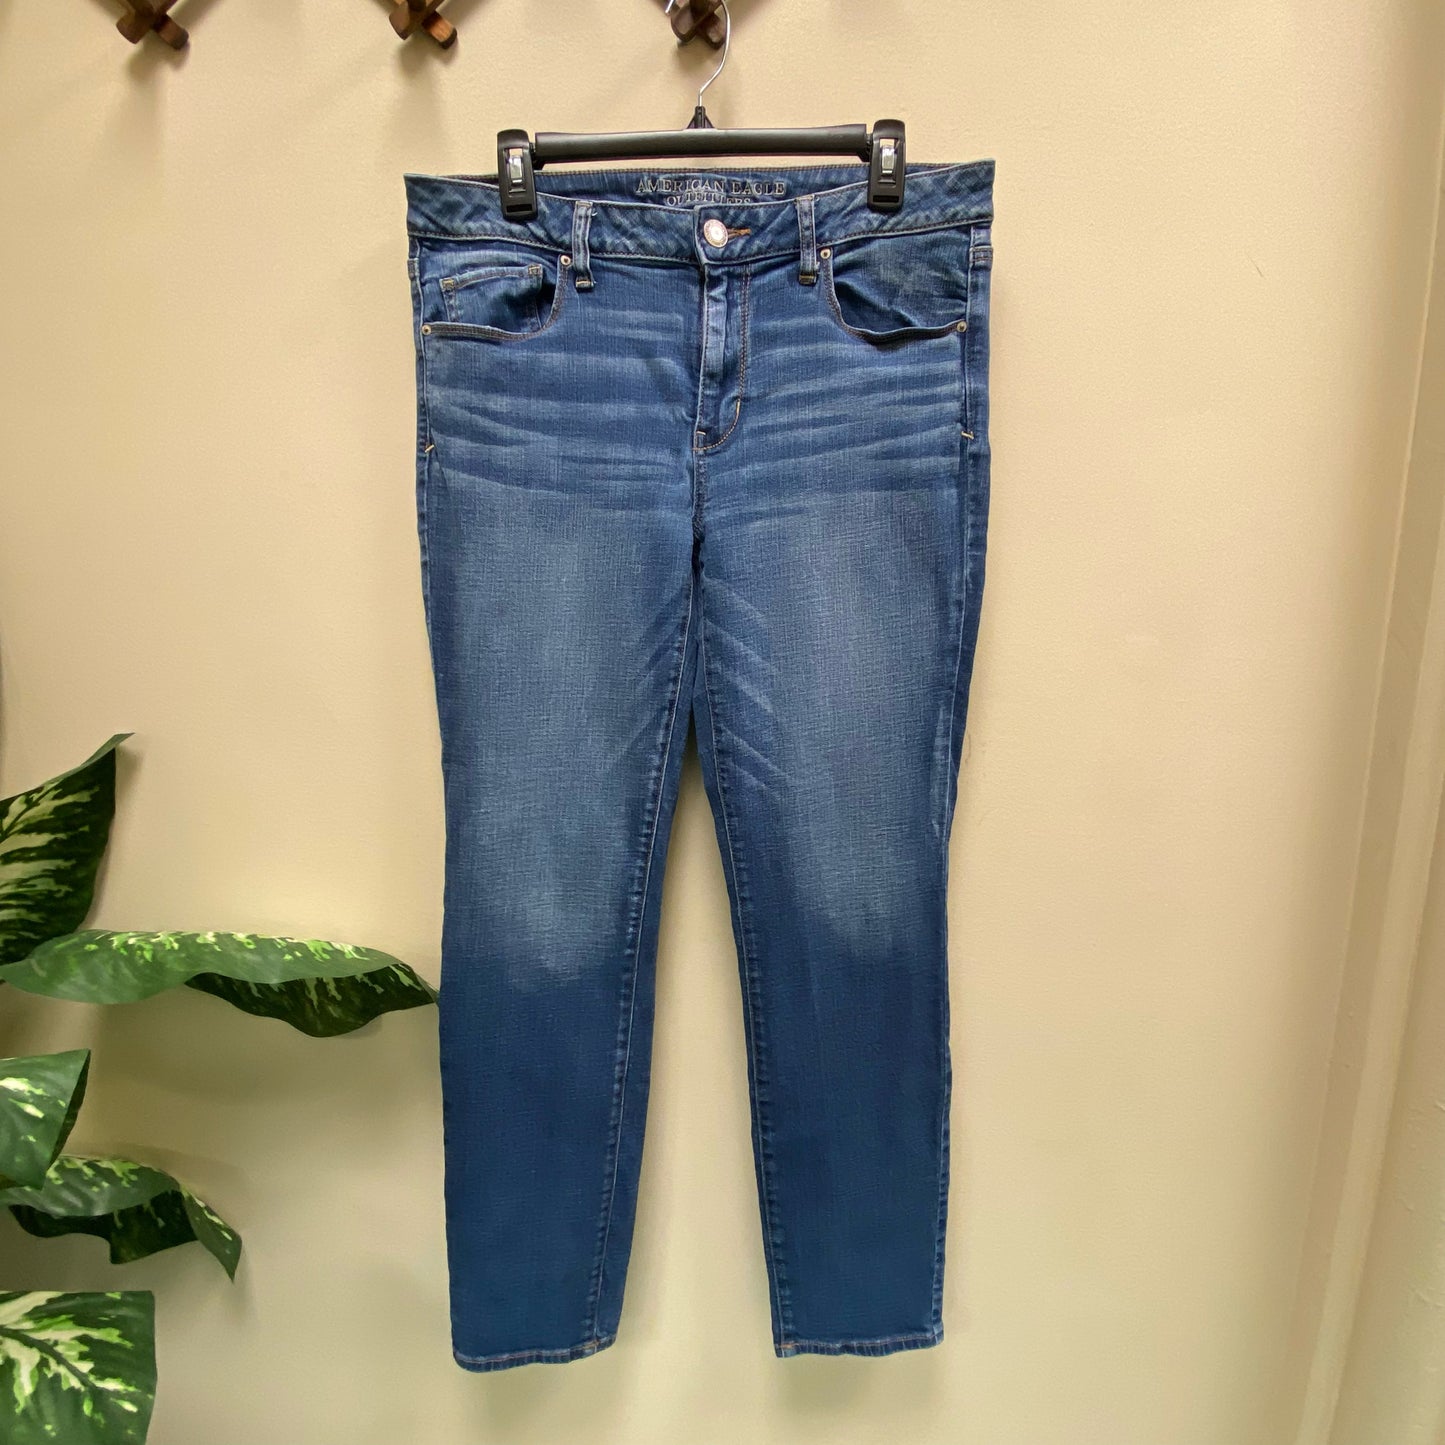 American Eagle Skinny Jeans - Size 14